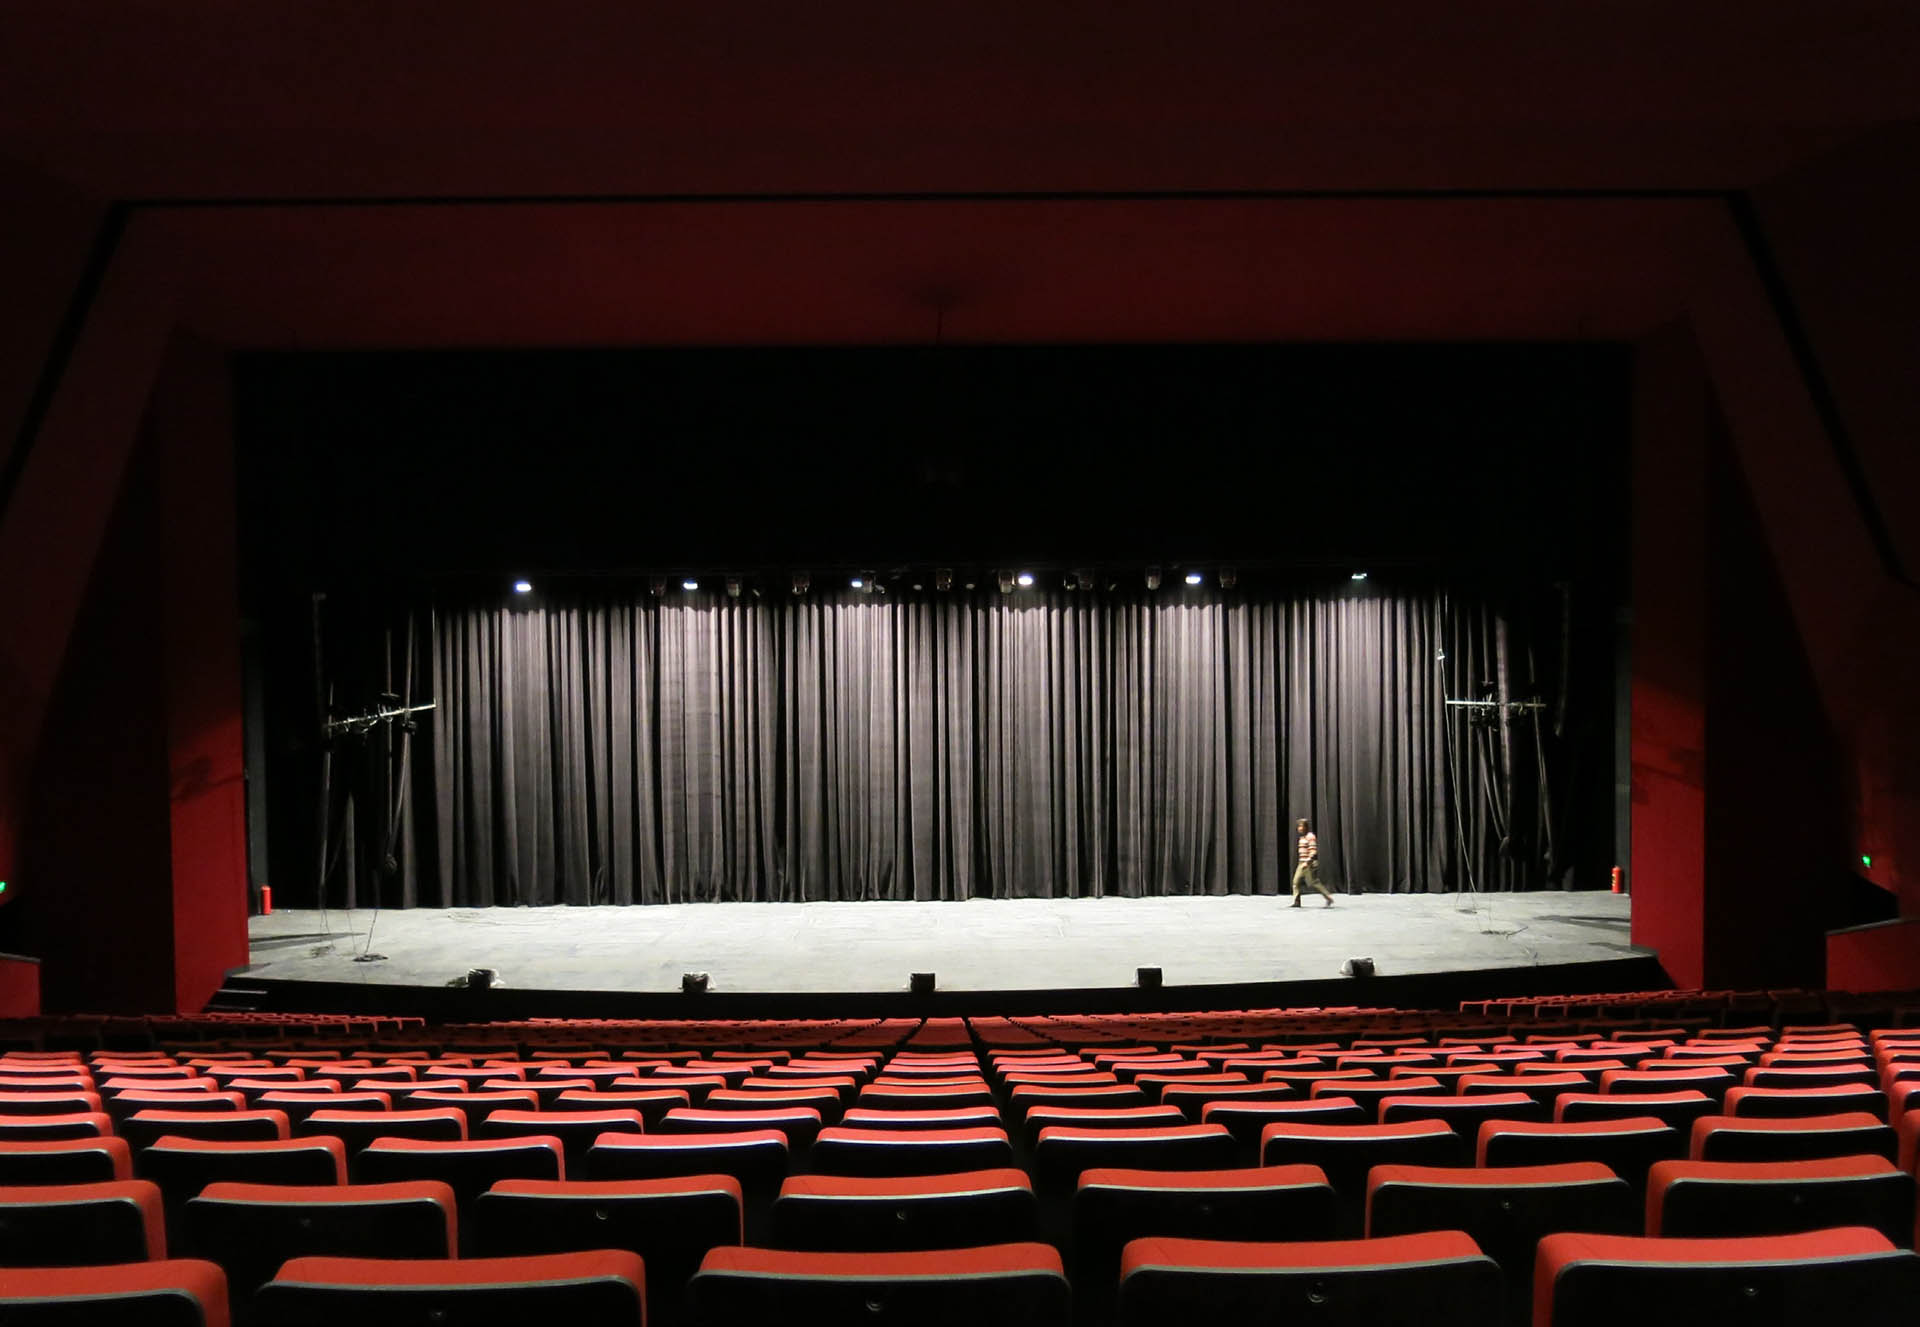 <p>The industrial sheds accommodate a 1,000-seat main theatre; four smaller "black box" theatres for experimental performances; a cinema and children’s puppet theatre, each seating 150; two practice rooms; a vast lobby space for conferences and festivals; a theatre-focused library; and restaurant and service areas.</p>